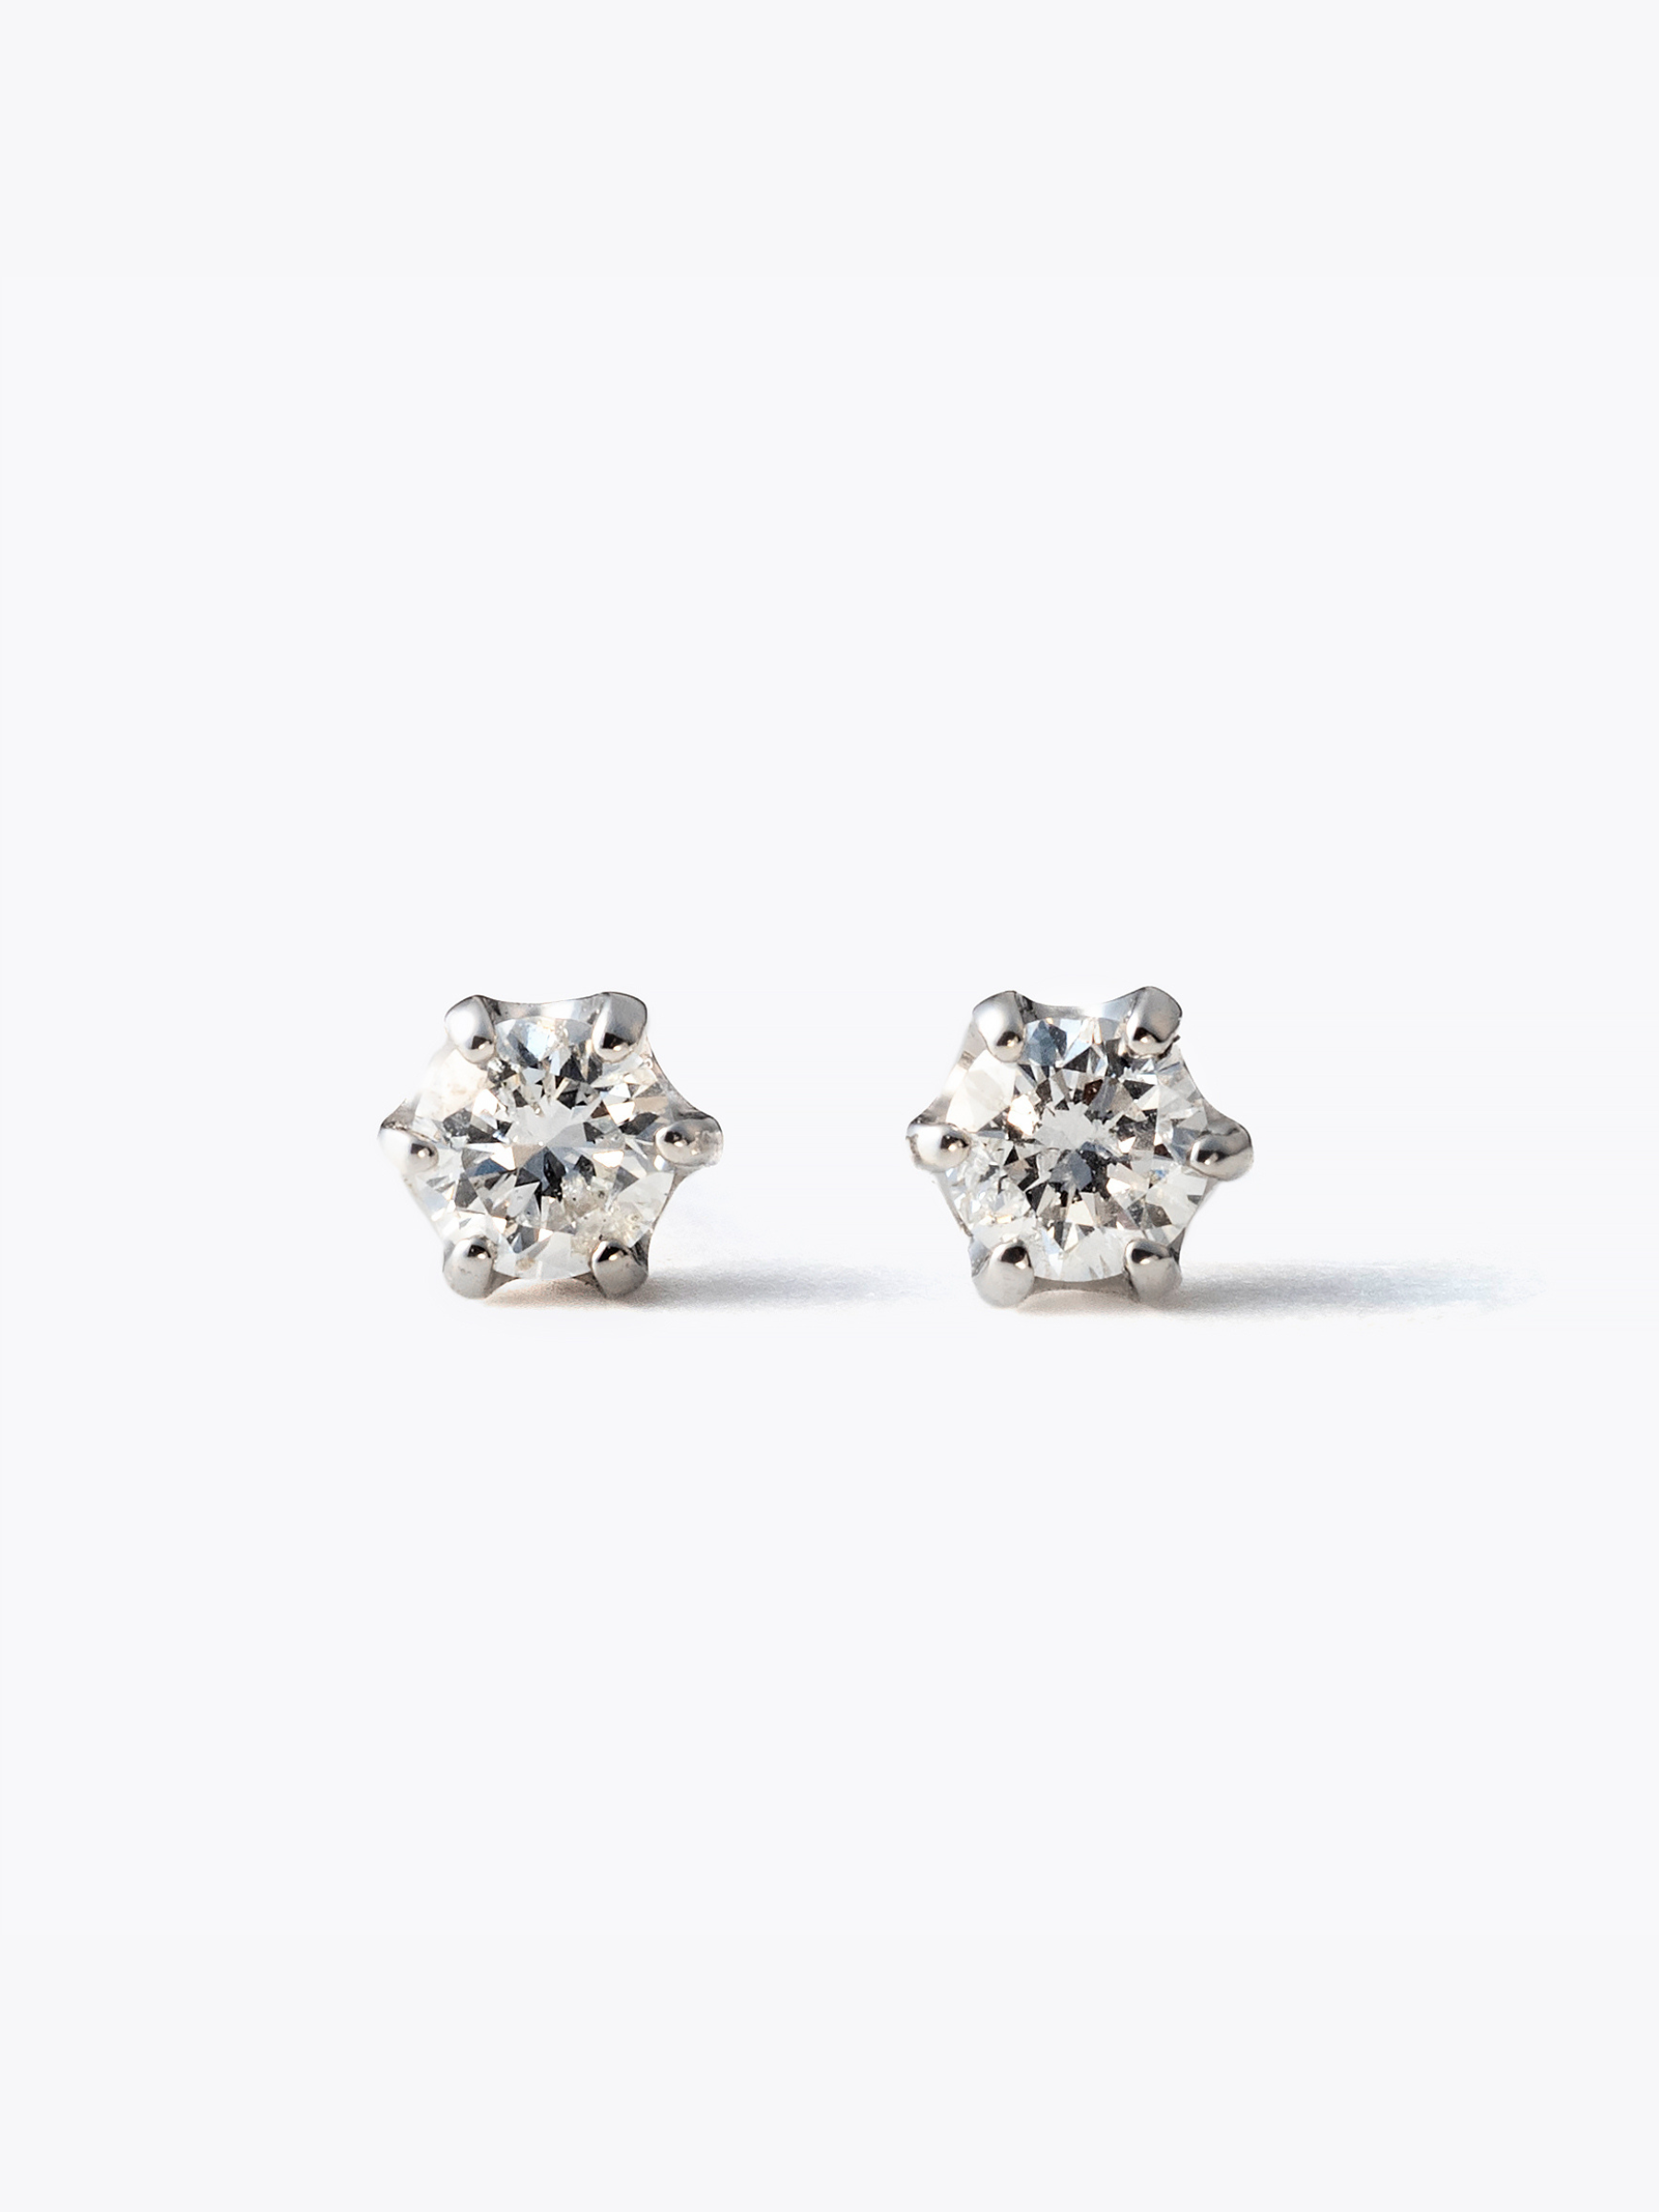 [Lumière] The earrings 0.1ct×2 (total 0.2ct)